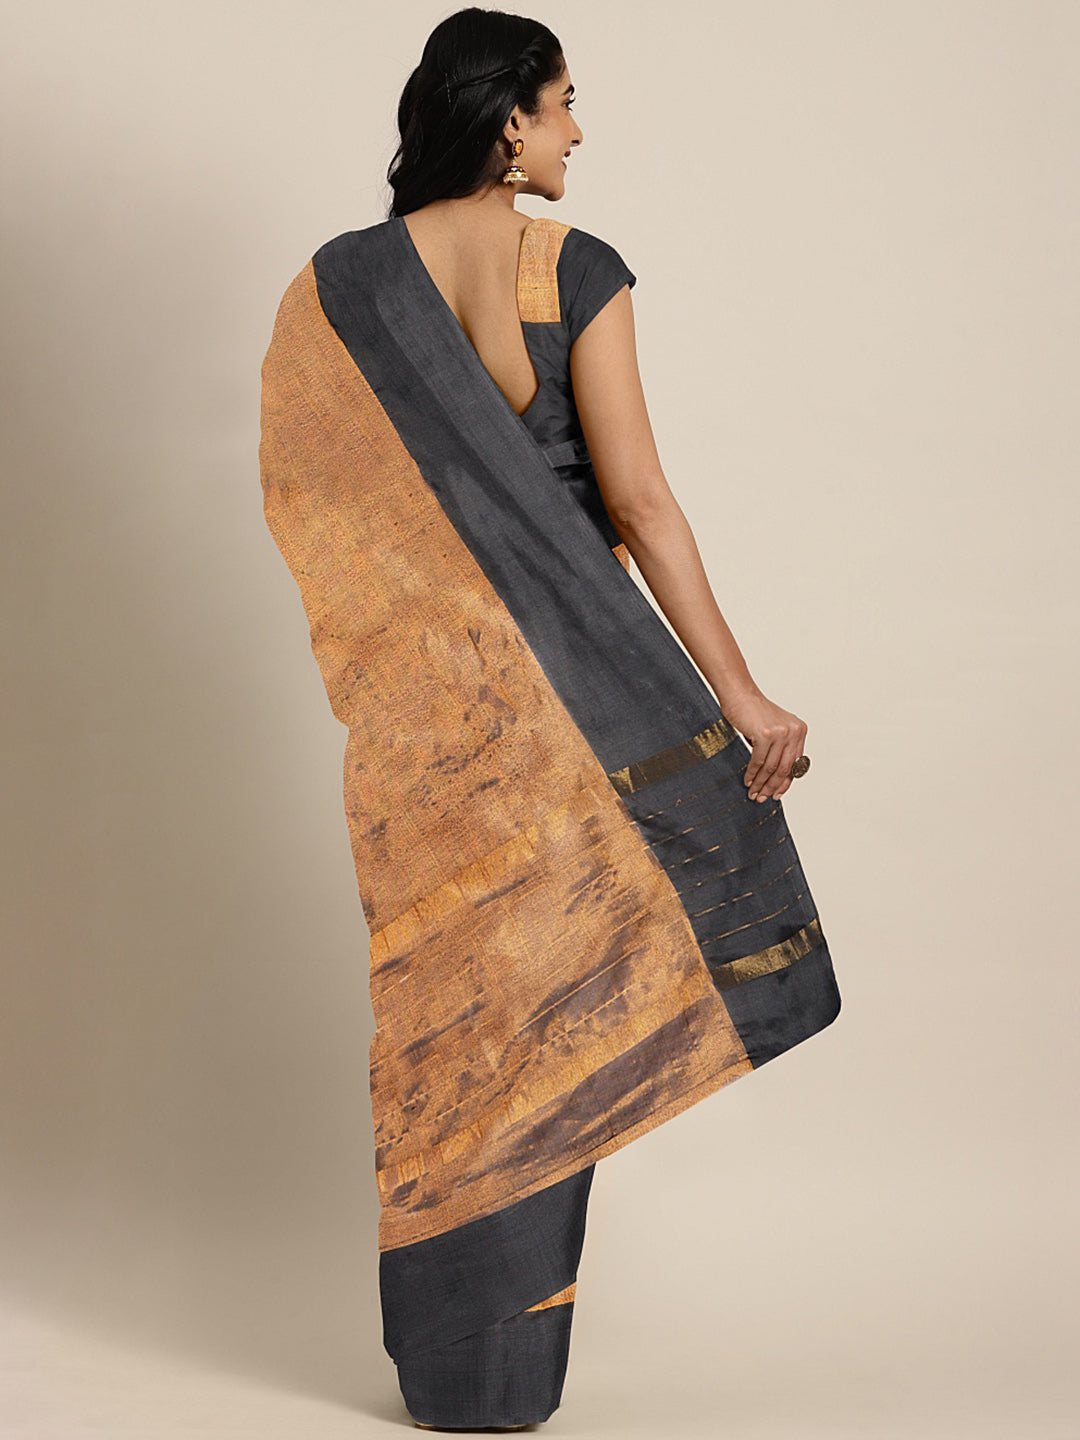 Kalakari India Upppada Silk Woven Saree With Blouse SKHSSA0005-Saree-Kalakari India-SKHSSA0005-Bollywood, Geographical Indication, Hand Crafted, Heritage Prints, Natural Dyes, Sarees, South Silk, Sustainable Fabrics, Uppada Silk, Woven-[Linen,Ethnic,wear,Fashionista,Handloom,Handicraft,Indigo,blockprint,block,print,Cotton,Chanderi,Blue, latest,classy,party,bollywood,trendy,summer,style,traditional,formal,elegant,unique,style,hand,block,print, dabu,booti,gift,present,glamorous,affordable,collecti